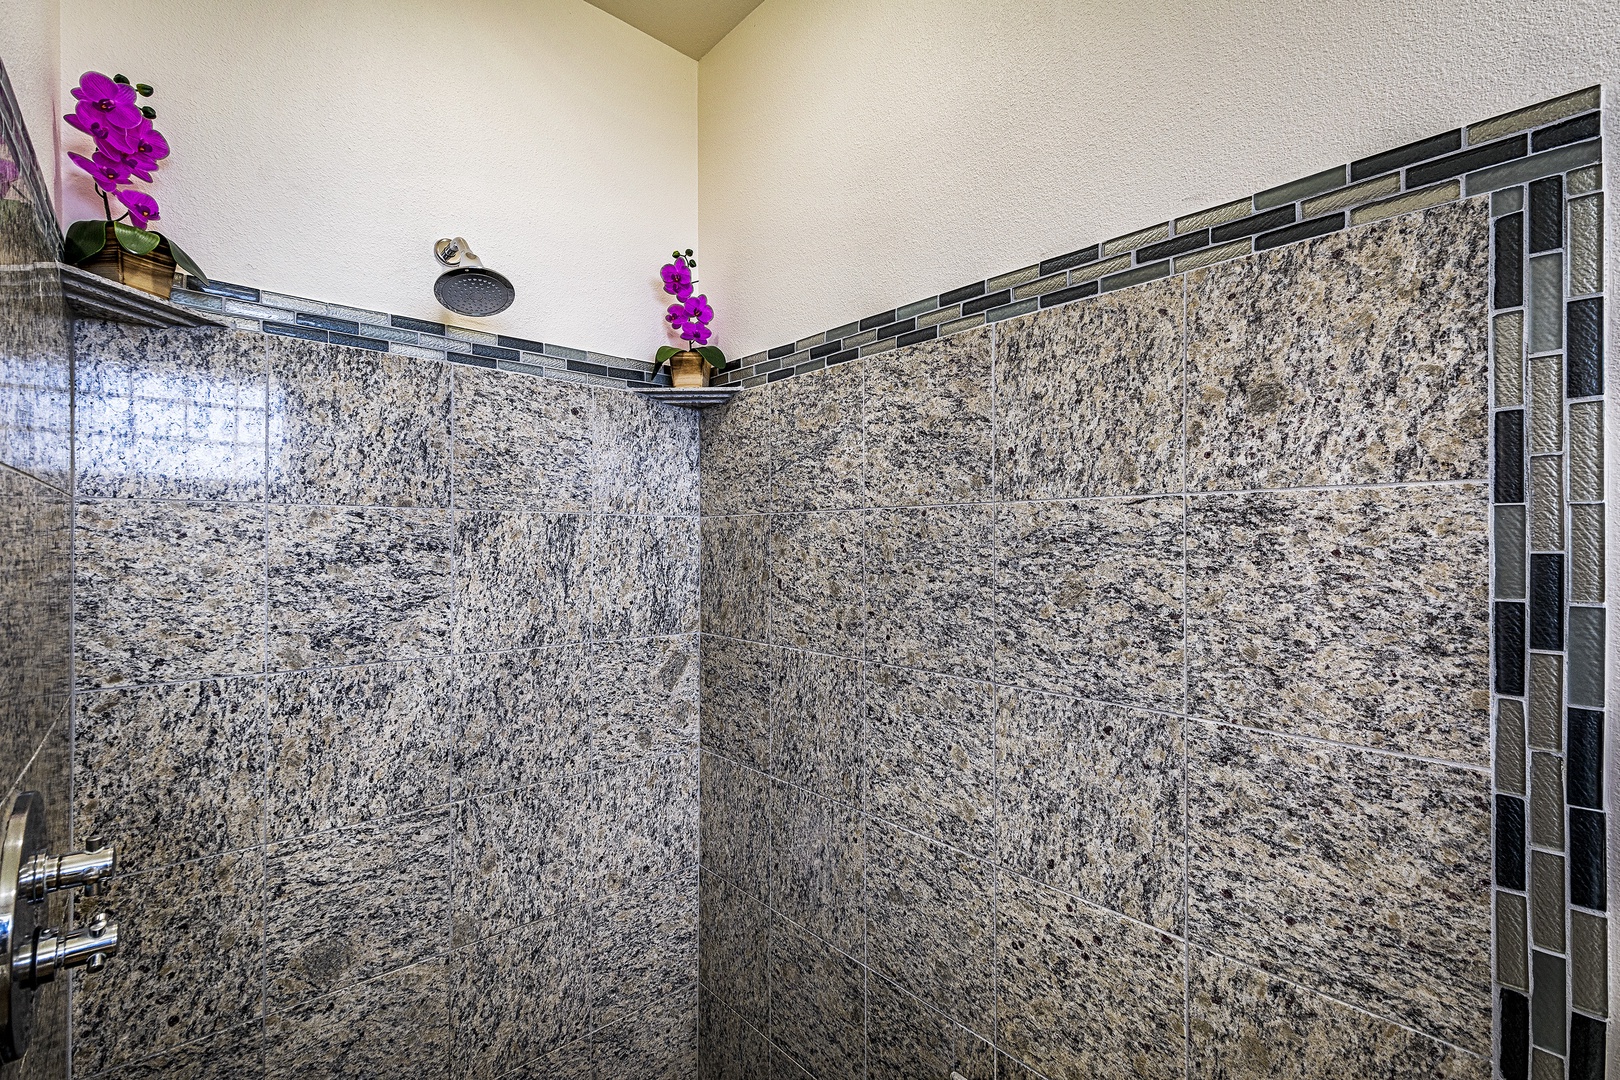 Kailua Kona Vacation Rentals, Maile Hale - Walk in shower in the Primary bathroom